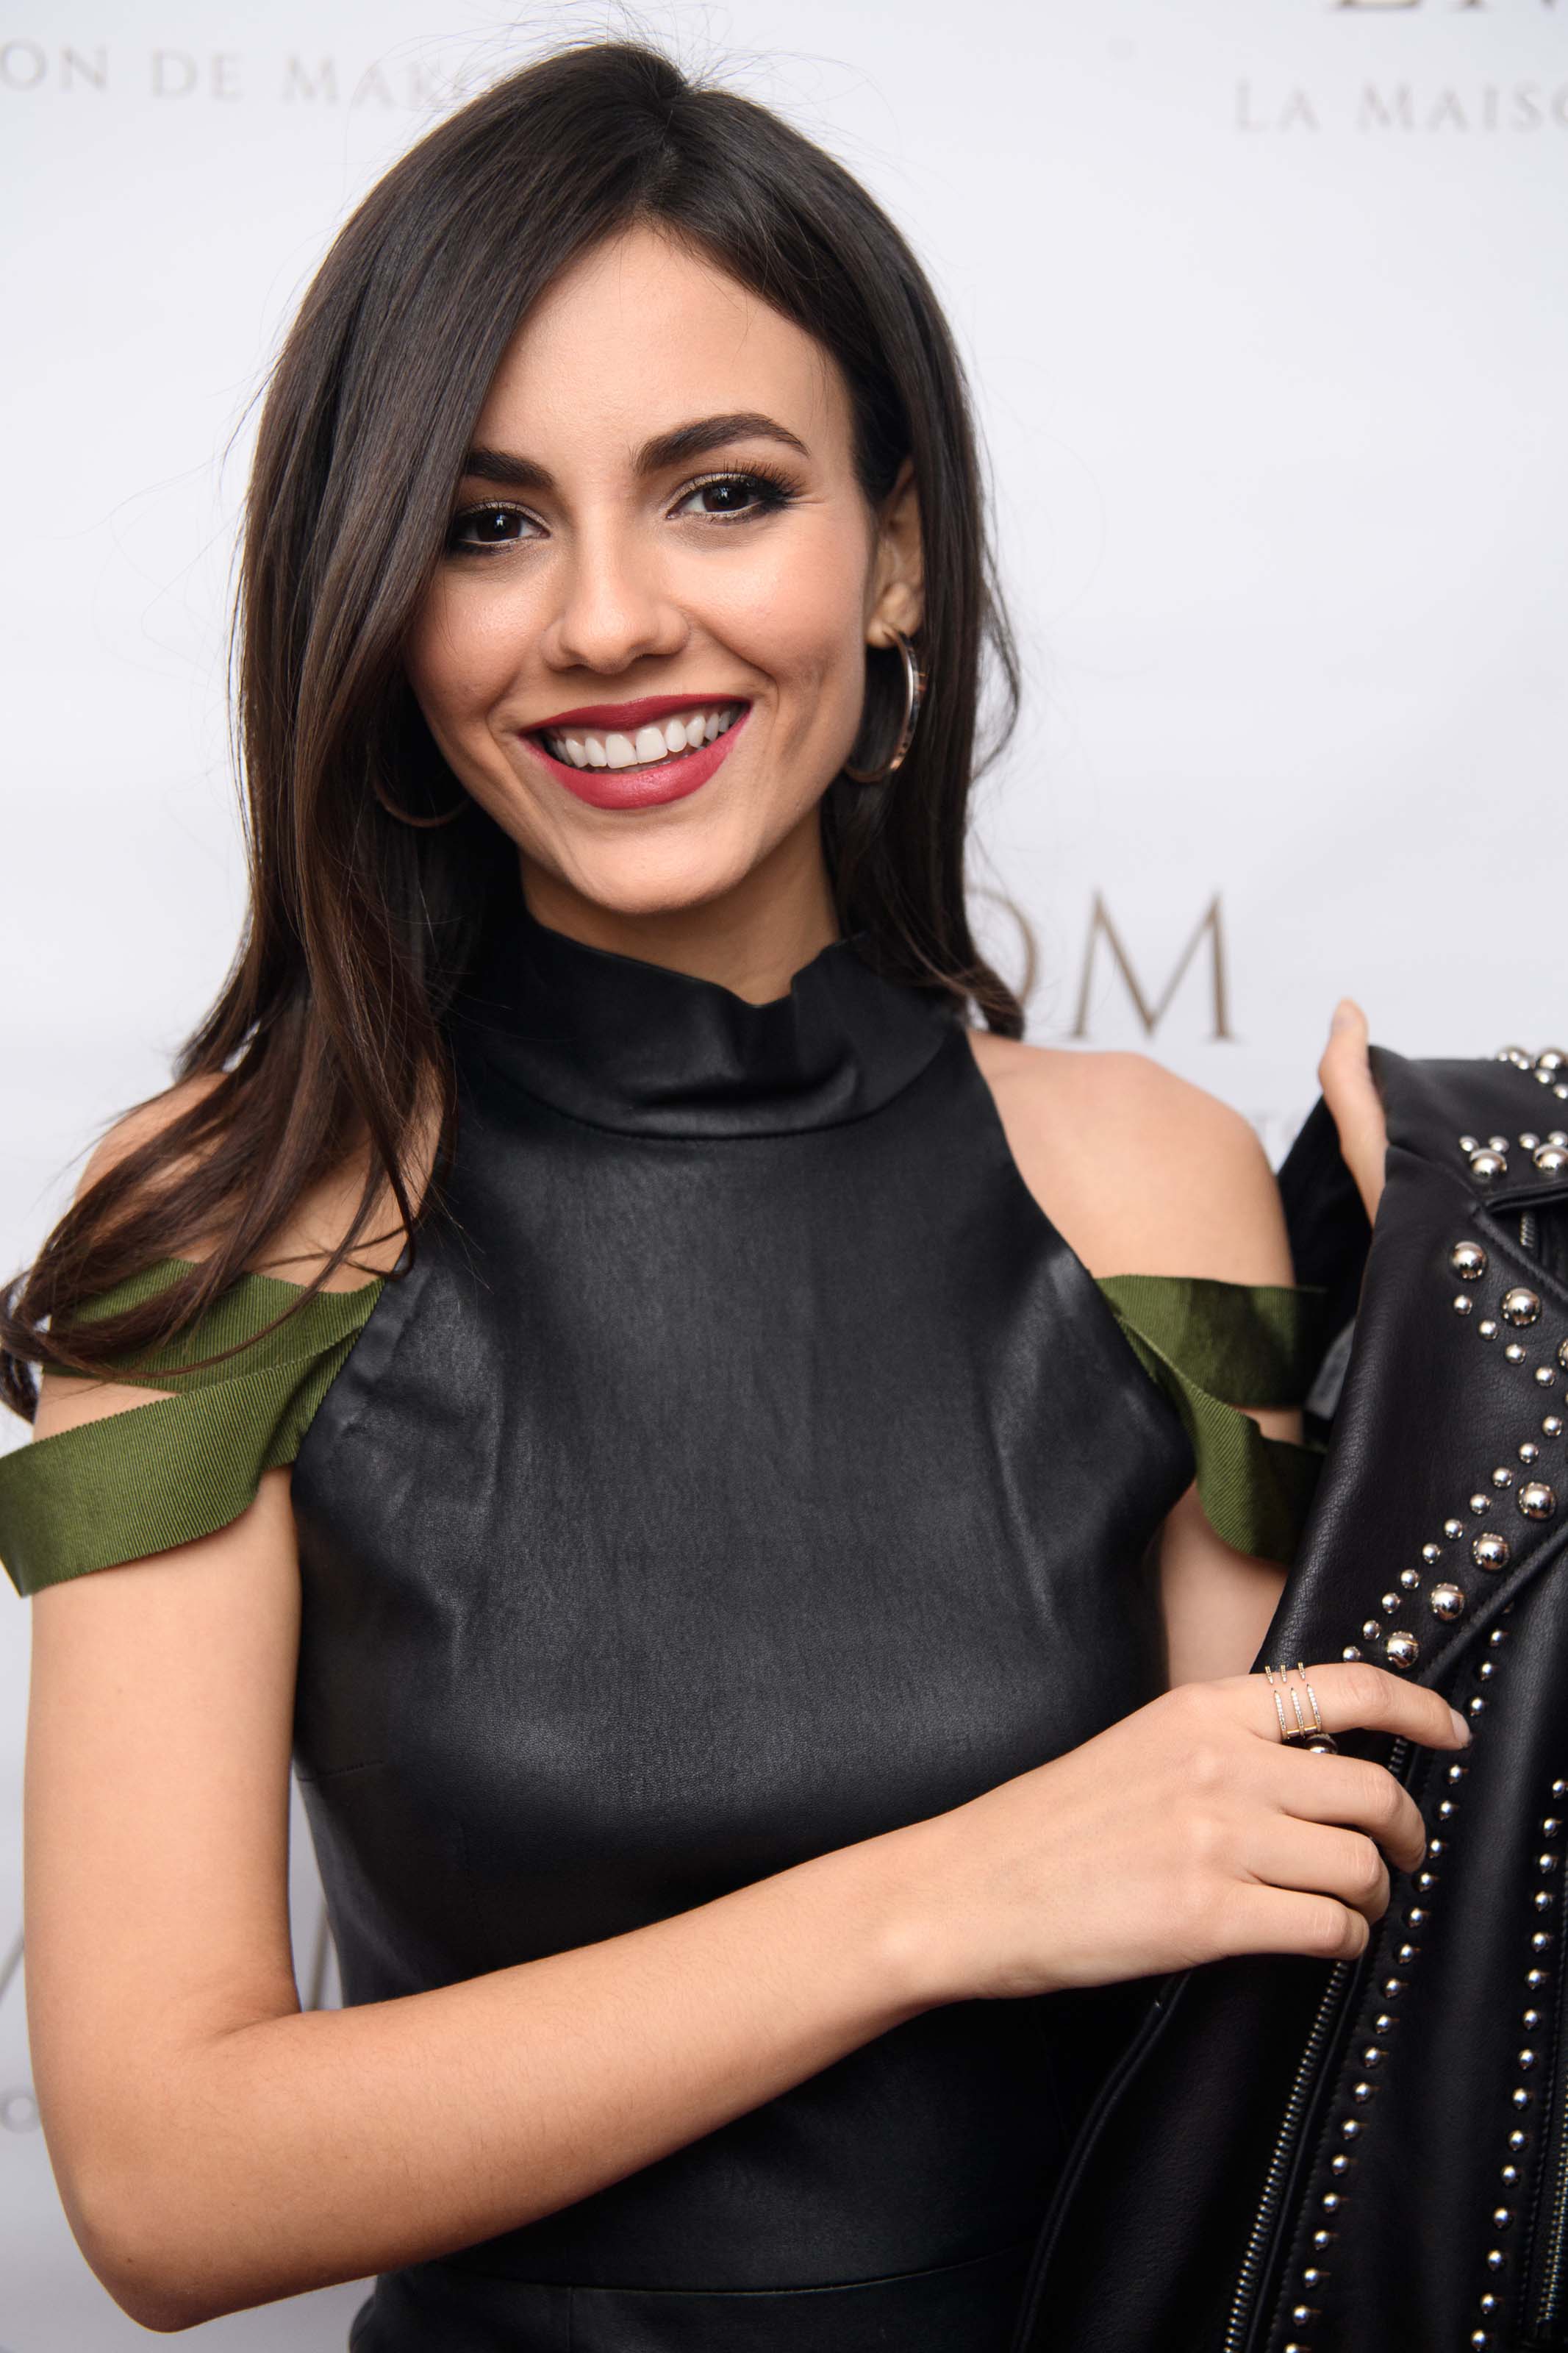 Victoria Justice attends LMDM Grand Opening Party